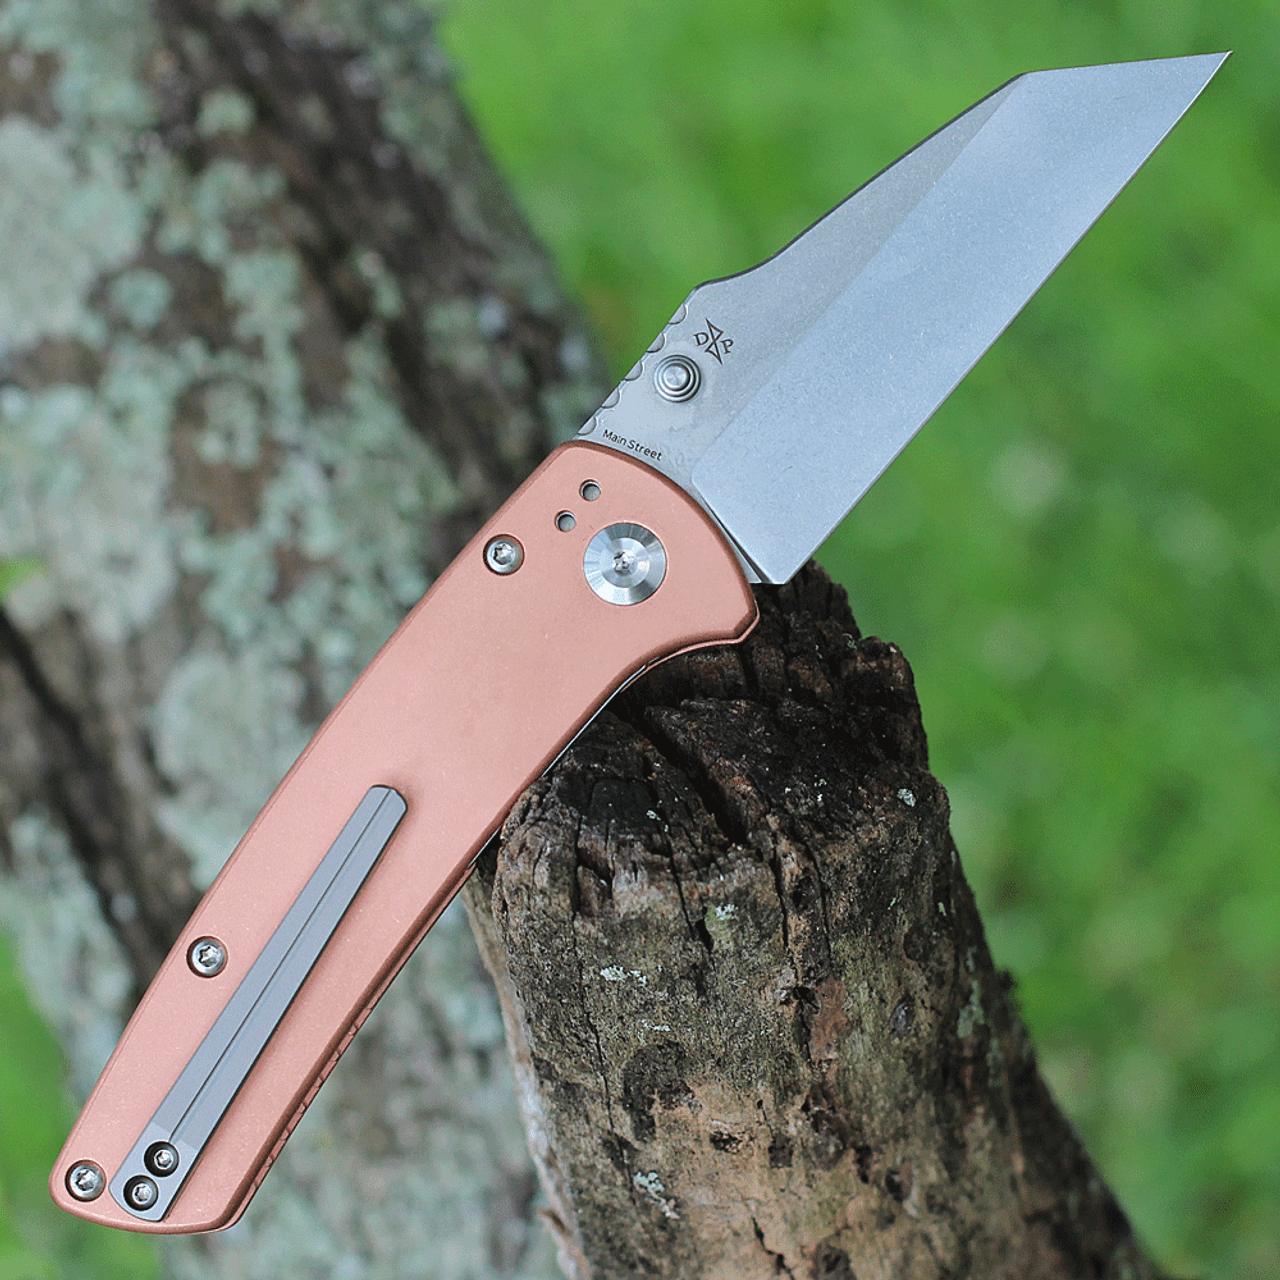 Kansept Knives Main Street KT1015B5, 3.41" 154CM Stonewashed Wharncliffe Blade, Copper Handle